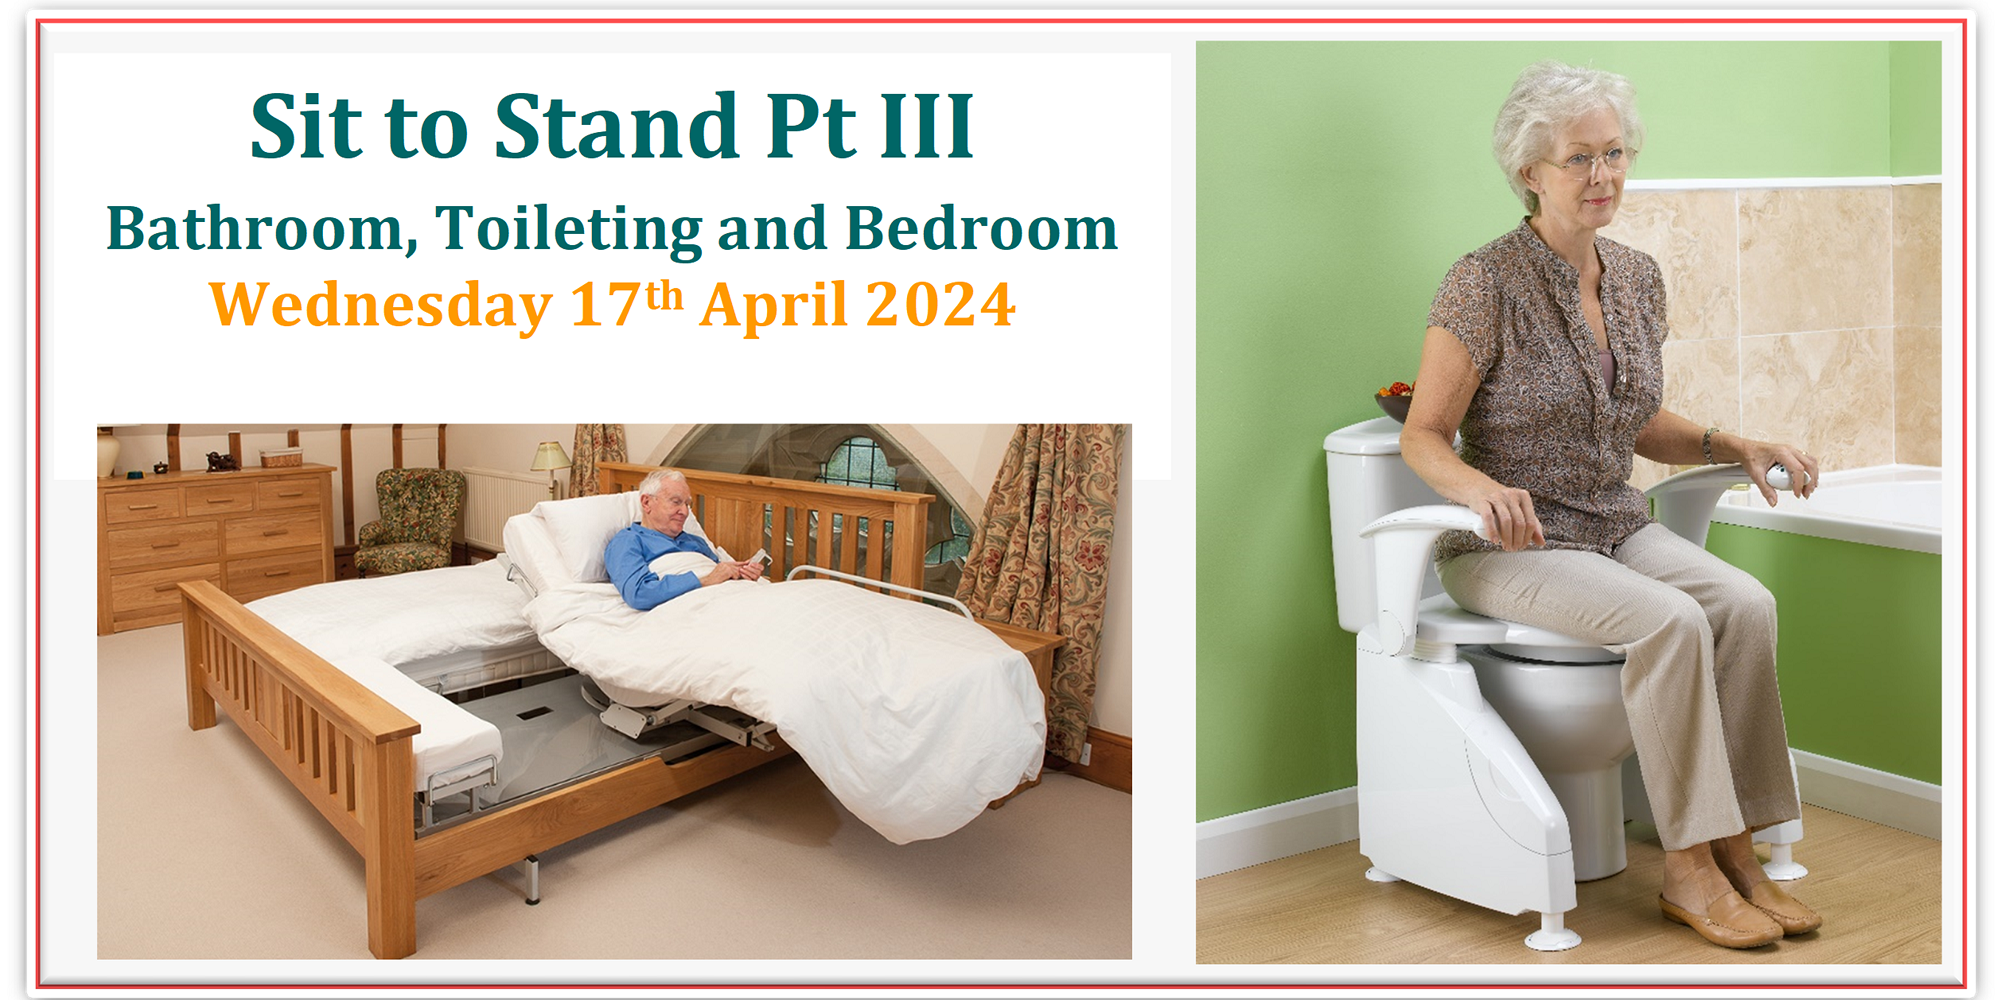 Lunch & Learn - Sit to Stand Part III: Bathroom, Toileting and Bedroom